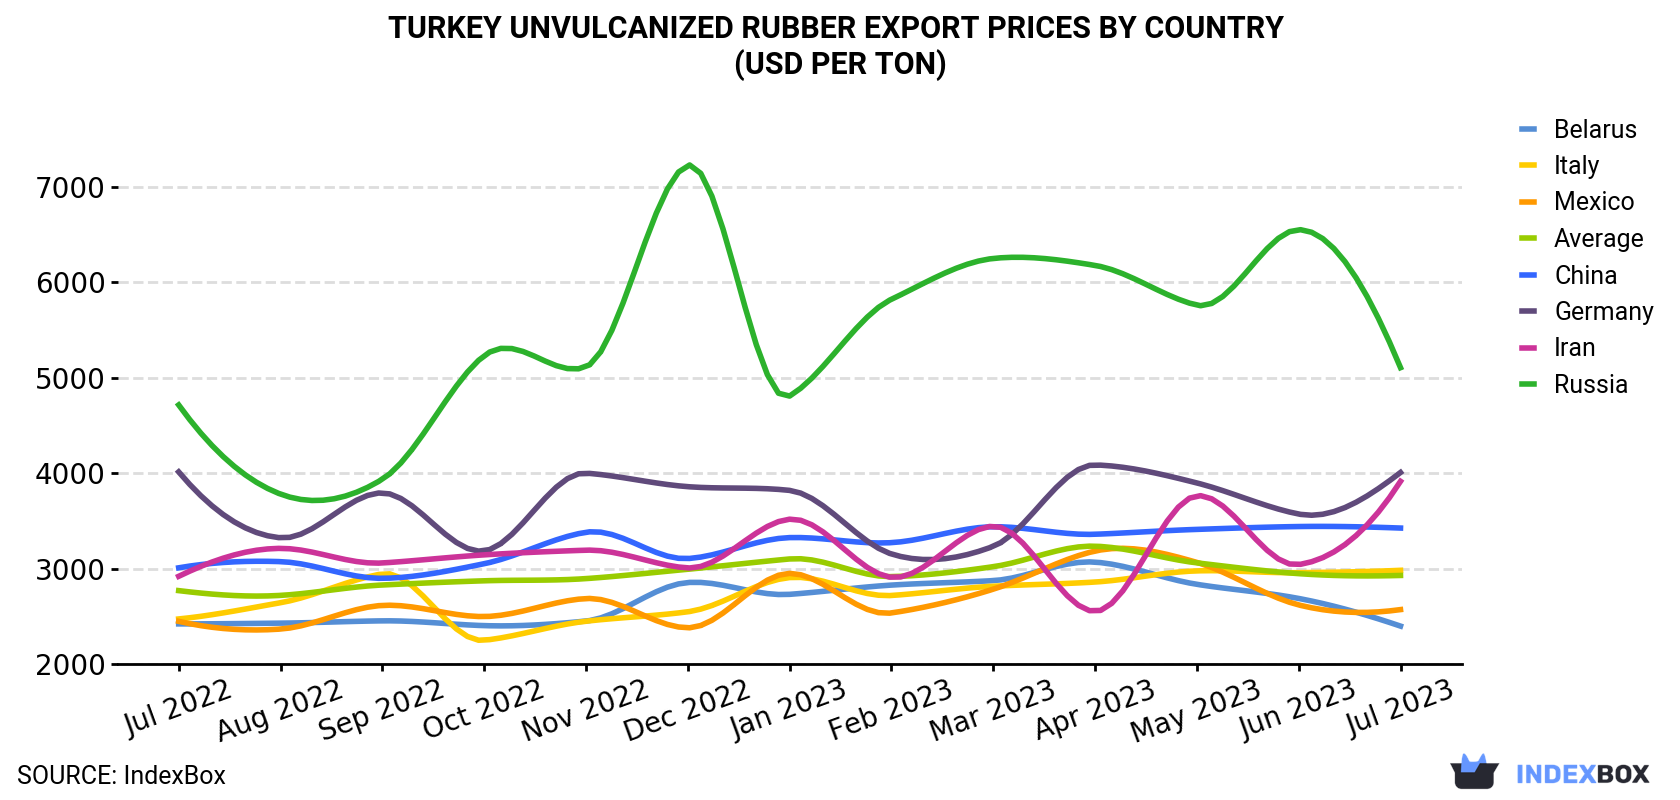 Turkey Unvulcanized Rubber Export Prices By Country (USD Per Ton)